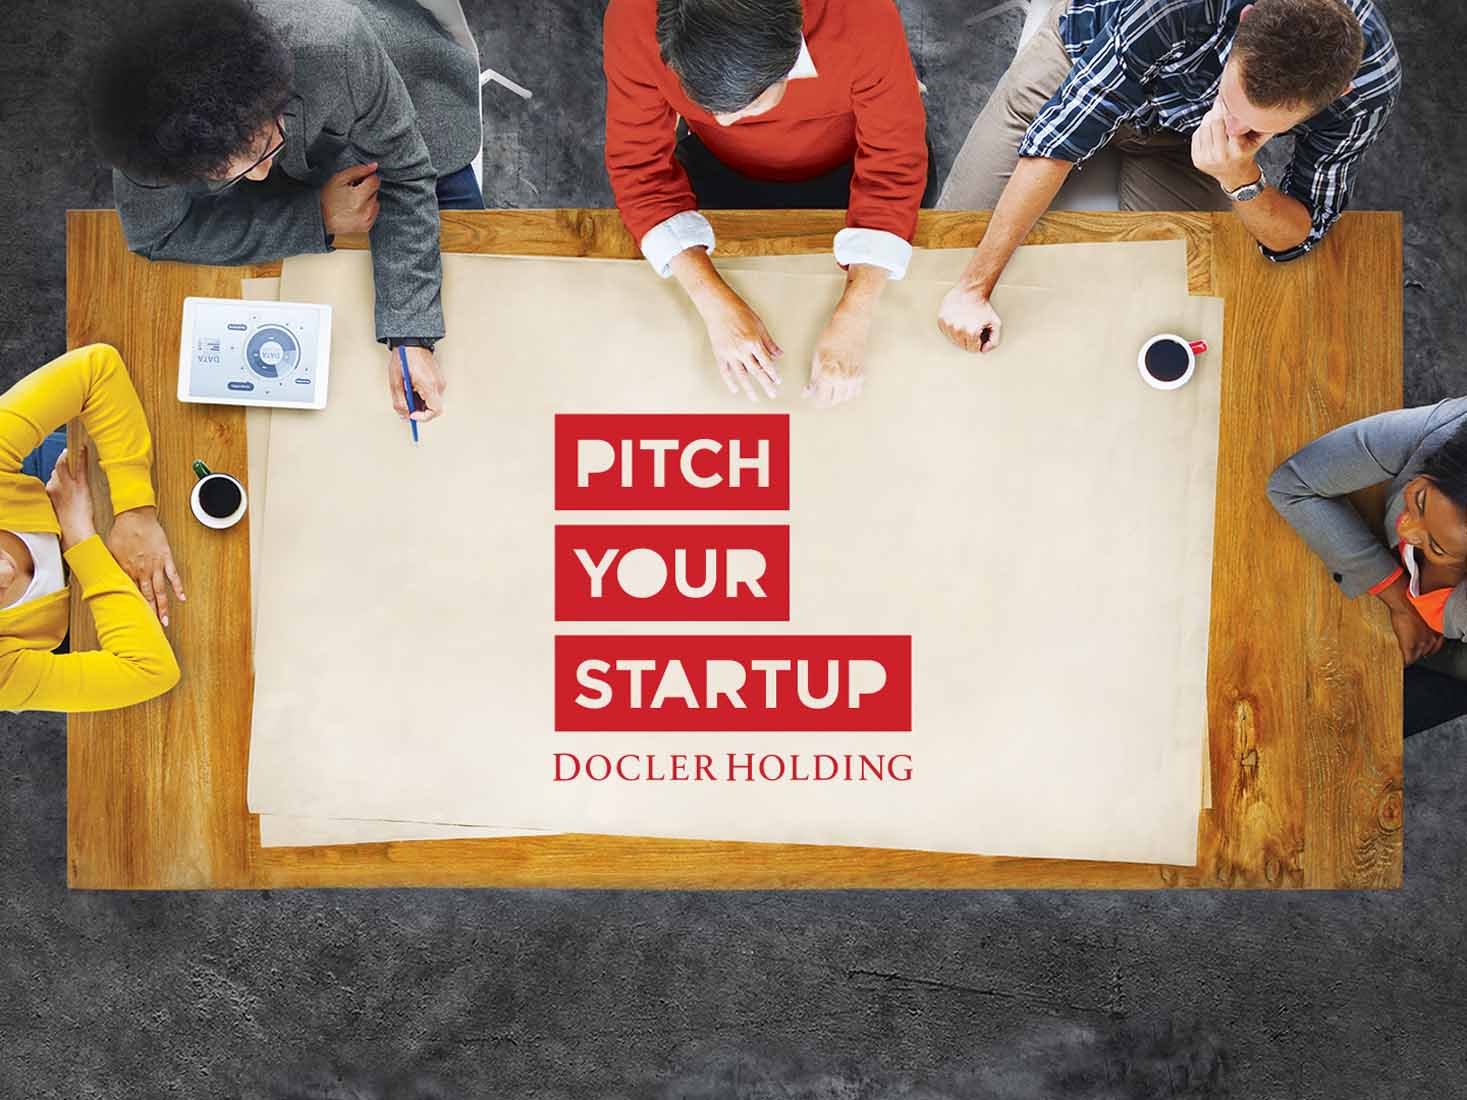 17 start-ups and 3 minutes 33 seconds to convince